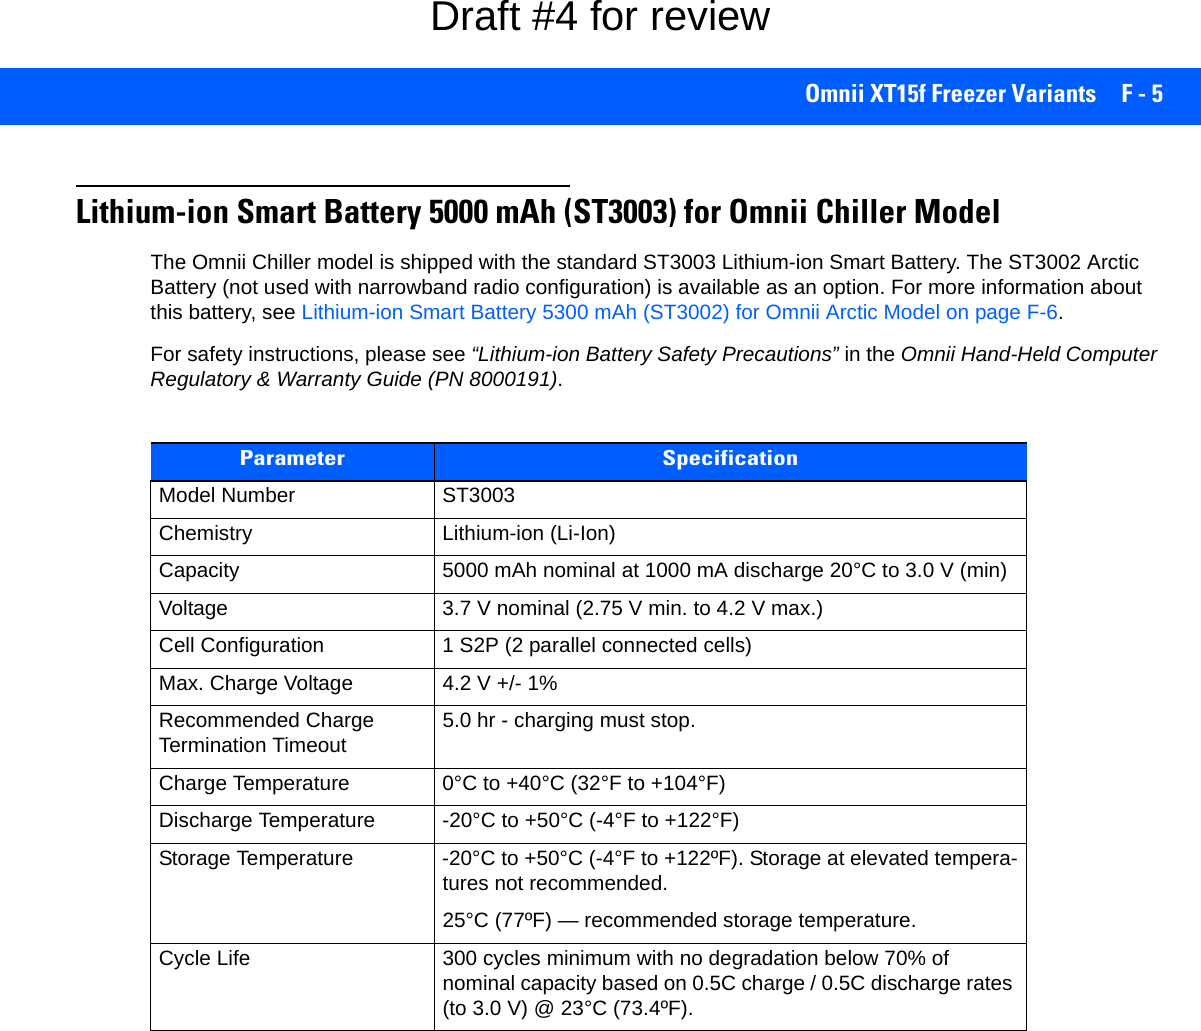 Omnii XT15f Freezer Variants F - 5Lithium-ion Smart Battery 5000 mAh (ST3003) for Omnii Chiller ModelThe Omnii Chiller model is shipped with the standard ST3003 Lithium-ion Smart Battery. The ST3002 Arctic Battery (not used with narrowband radio configuration) is available as an option. For more information about this battery, see Lithium-ion Smart Battery 5300 mAh (ST3002) for Omnii Arctic Model on page F-6. For safety instructions, please see “Lithium-ion Battery Safety Precautions” in the Omnii Hand-Held Computer Regulatory &amp; Warranty Guide (PN 8000191).Parameter SpecificationModel Number ST3003Chemistry Lithium-ion (Li-Ion)Capacity 5000 mAh nominal at 1000 mA discharge 20°C to 3.0 V (min)Voltage 3.7 V nominal (2.75 V min. to 4.2 V max.)Cell Configuration 1 S2P (2 parallel connected cells)Max. Charge Voltage 4.2 V +/- 1%Recommended Charge Termination Timeout 5.0 hr - charging must stop.Charge Temperature 0°C to +40°C (32°F to +104°F)Discharge Temperature -20°C to +50°C (-4°F to +122°F)Storage Temperature -20°C to +50°C (-4°F to +122ºF). Storage at elevated tempera-tures not recommended.25°C (77ºF) — recommended storage temperature. Cycle Life 300 cycles minimum with no degradation below 70% of nominal capacity based on 0.5C charge / 0.5C discharge rates (to 3.0 V) @ 23°C (73.4ºF).Draft #4 for review